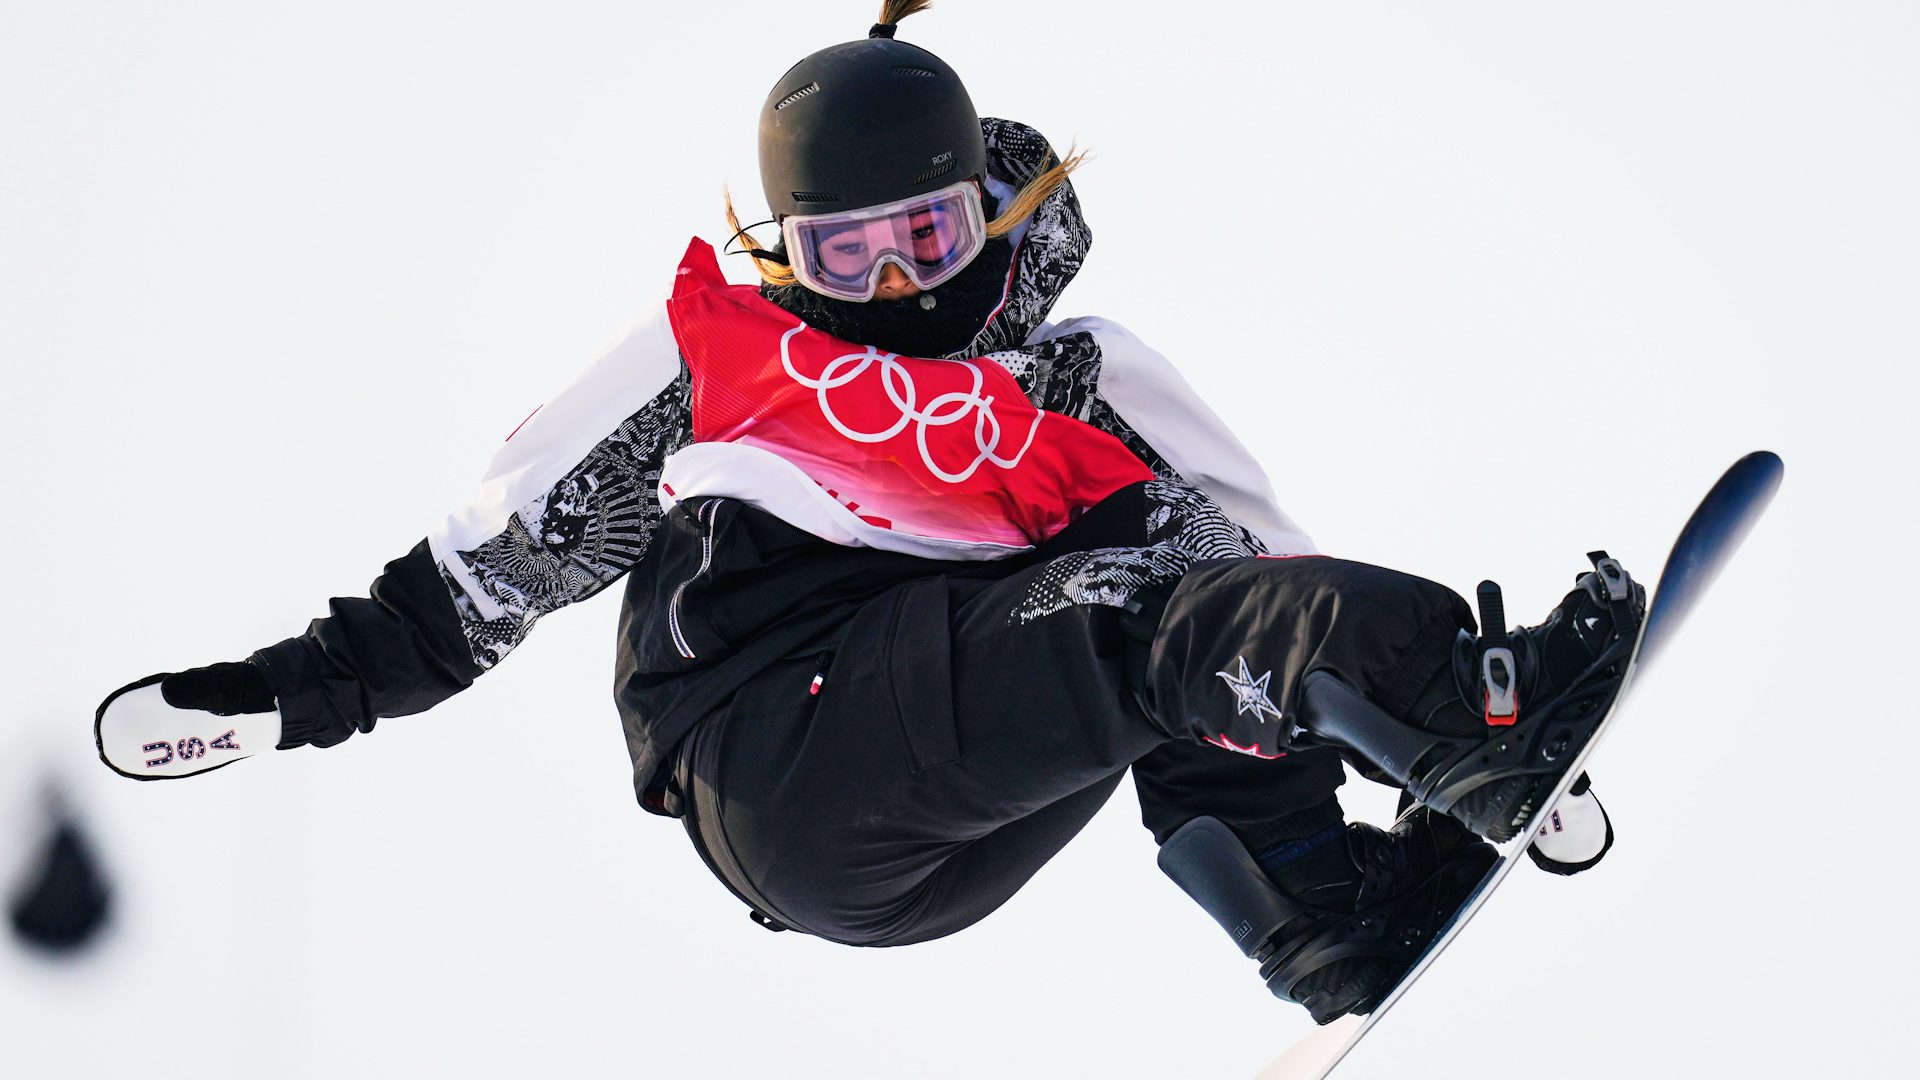 Chloe Kim Defends Olympic Title With Second Gold in Snowboarding Halfpipe